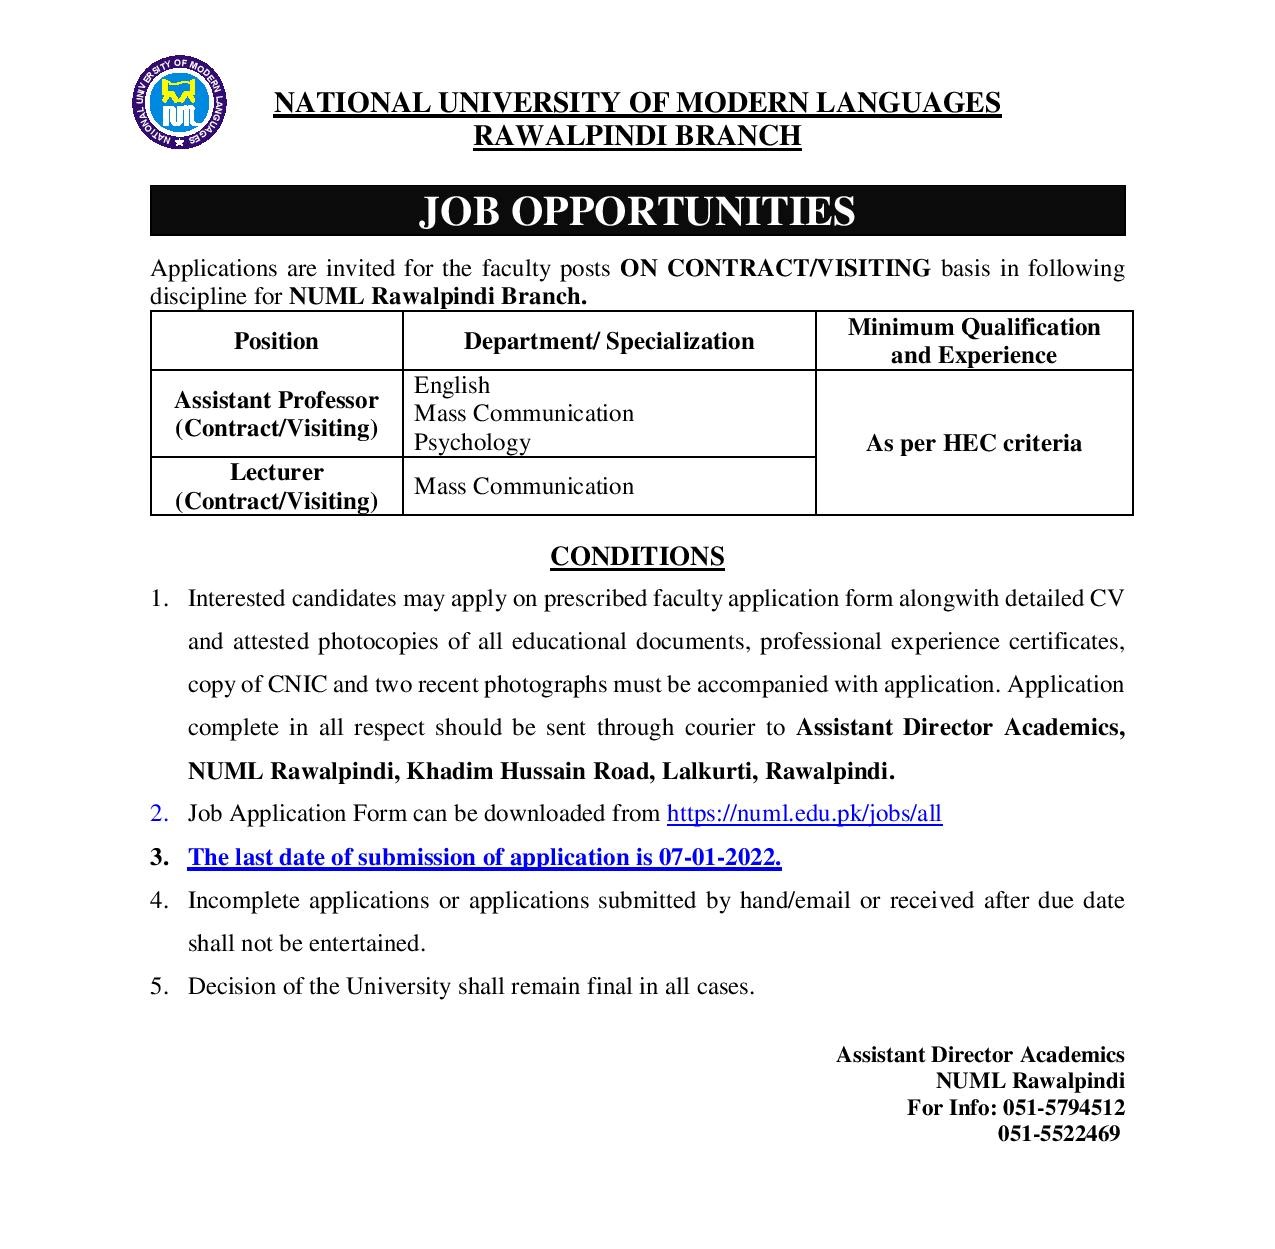 National University of Modern Languages NUML Jobs 2022 All Campuses